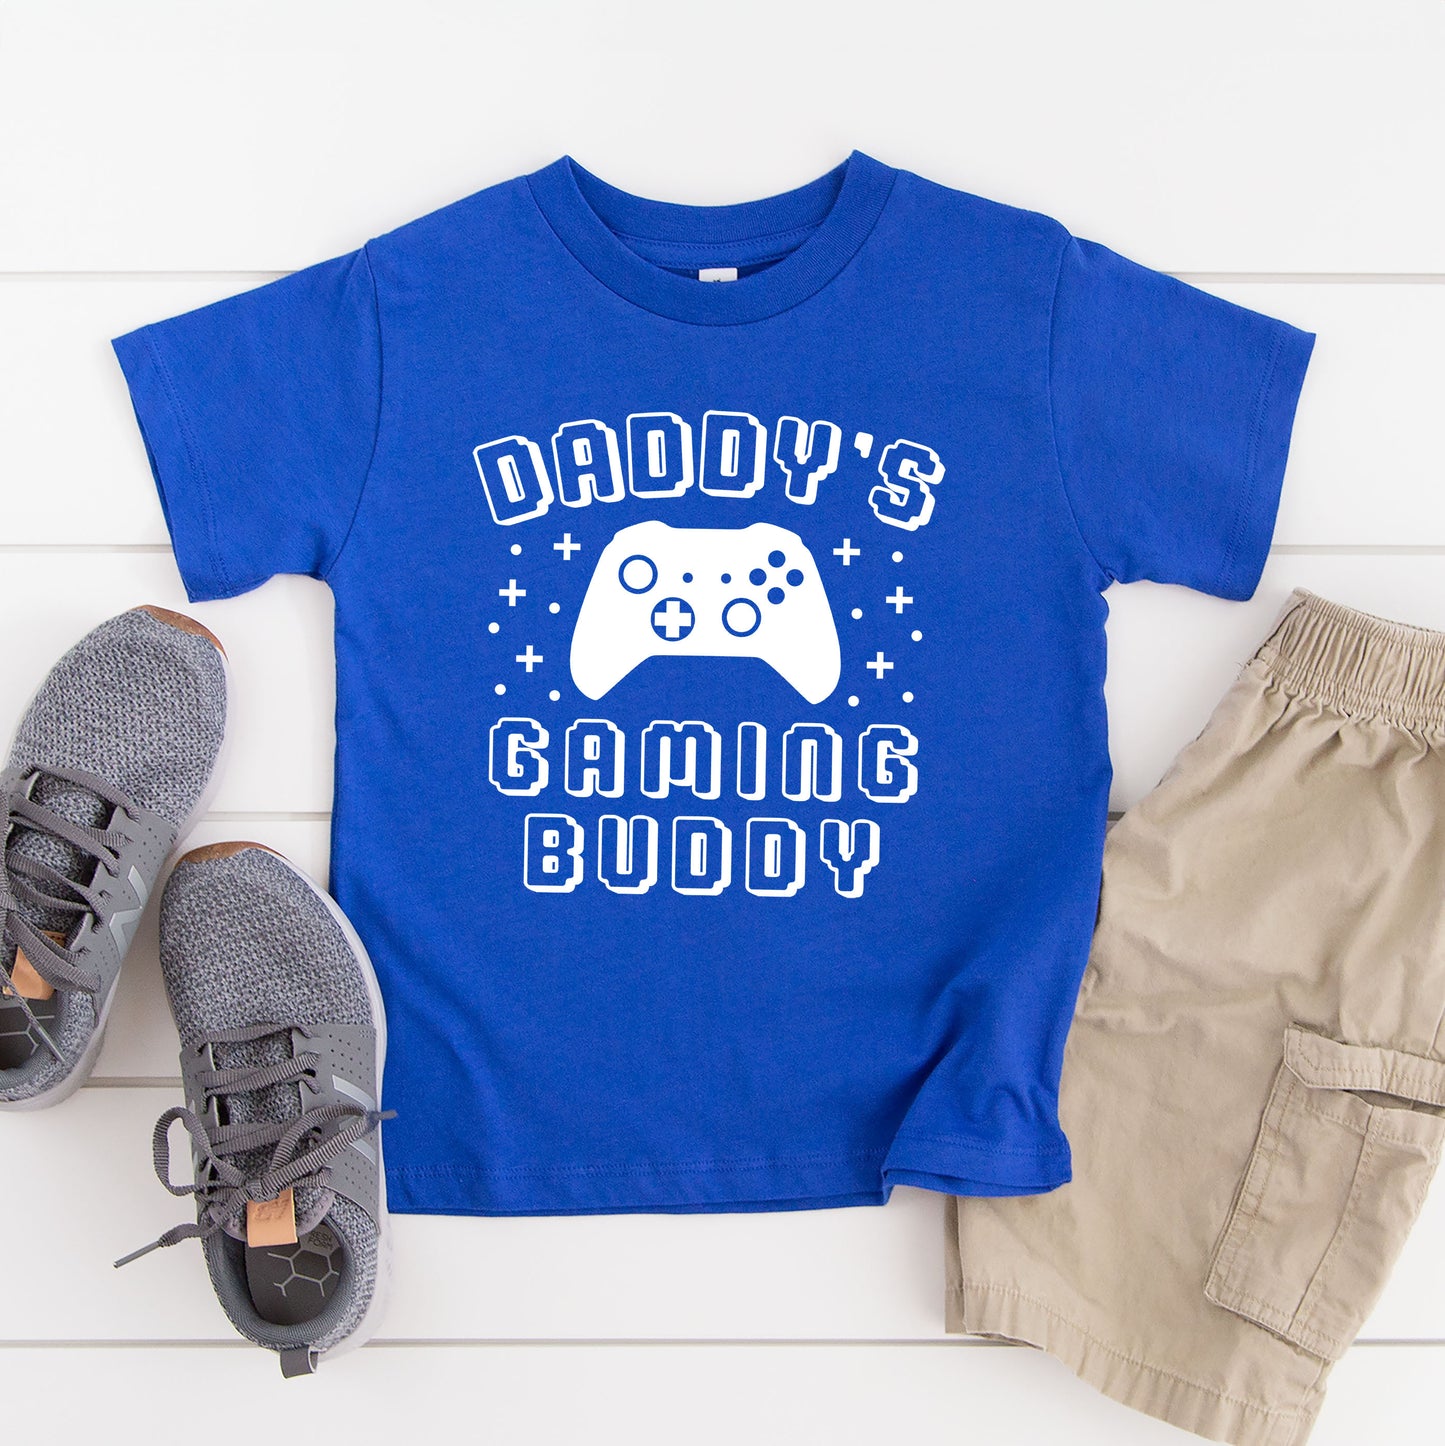 Daddy's Gaming Buddy | Toddler Graphic Short Sleeve Tee